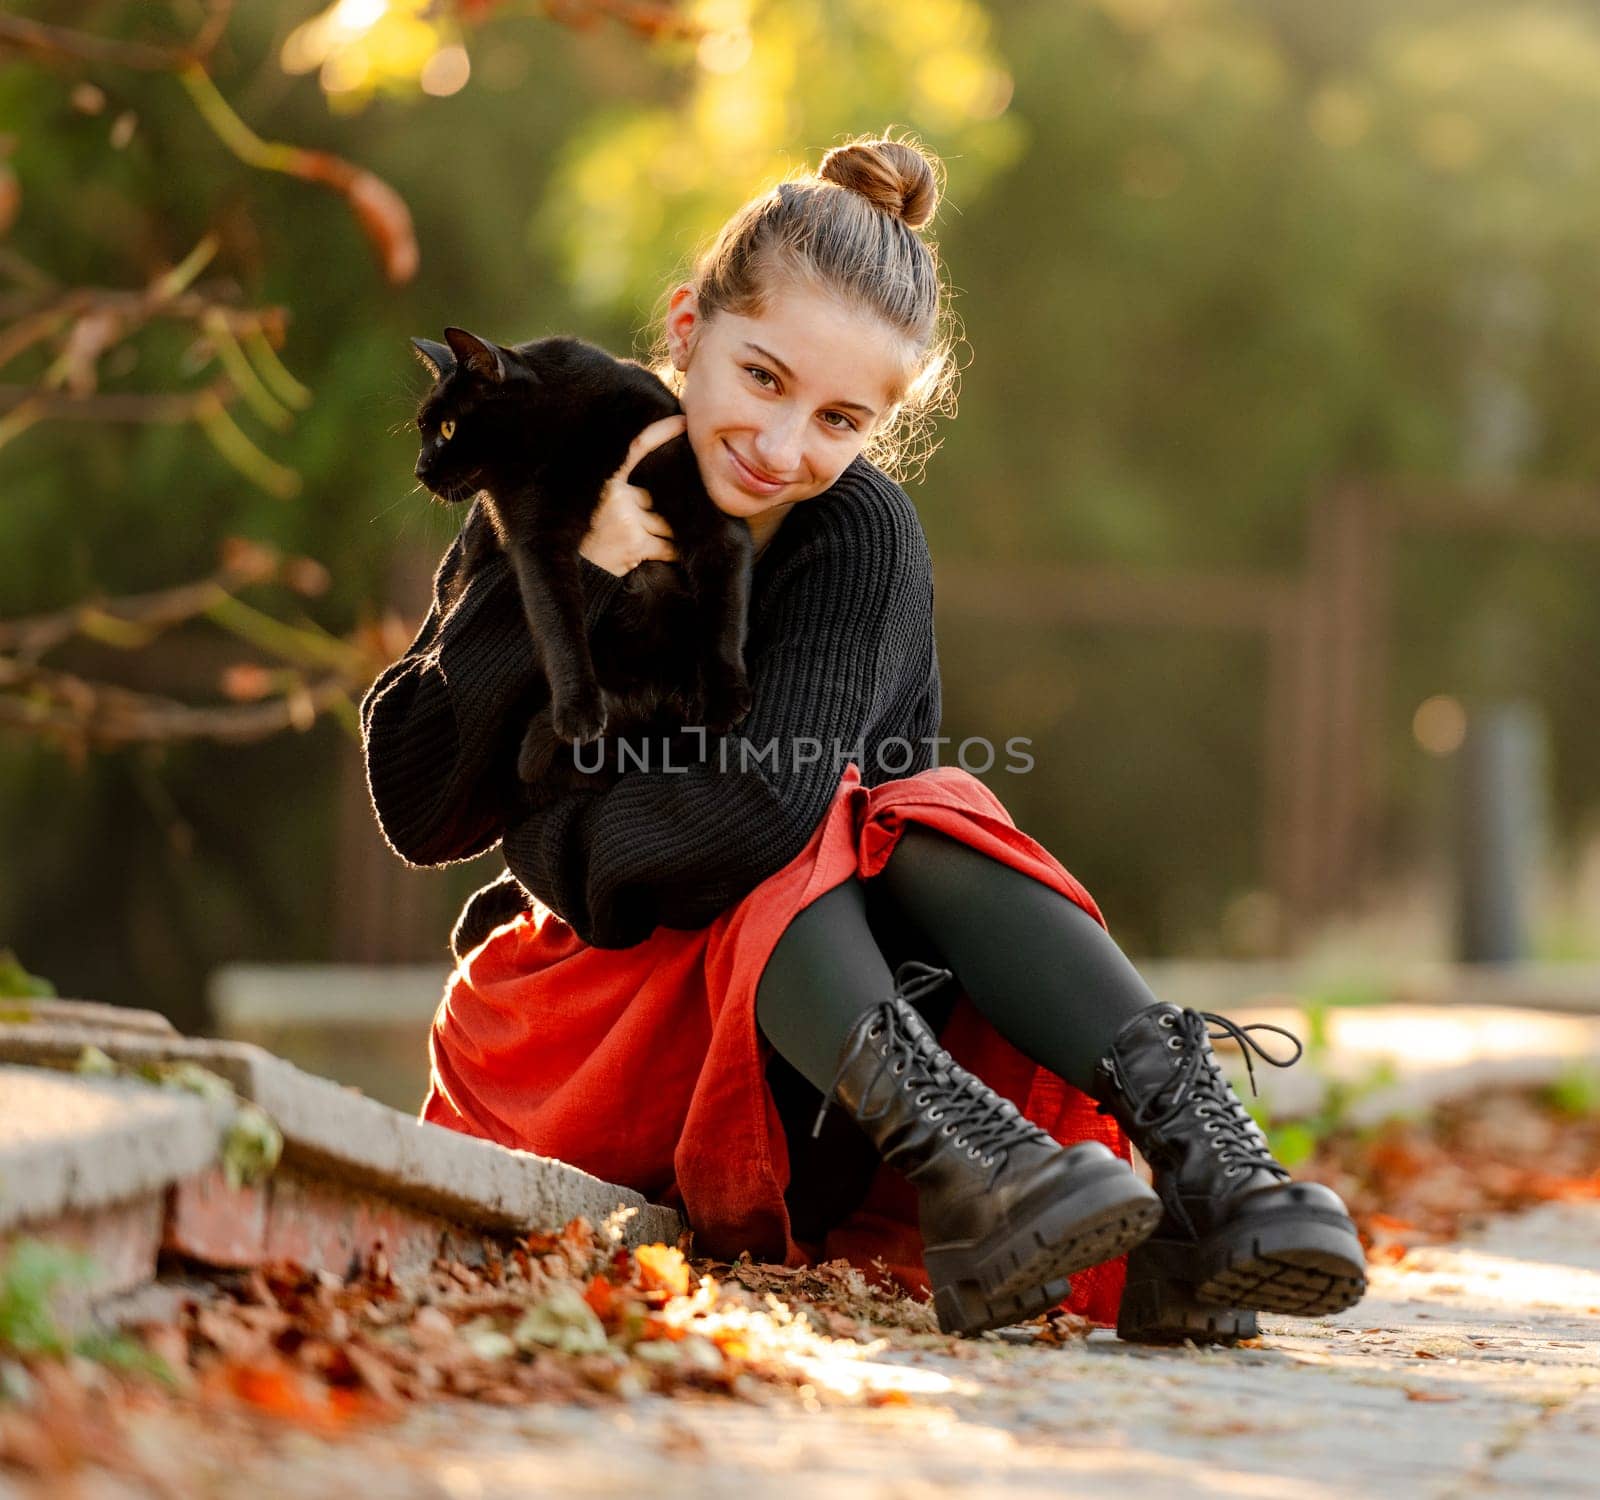 Pretty girl with black cat outdoors by tan4ikk1